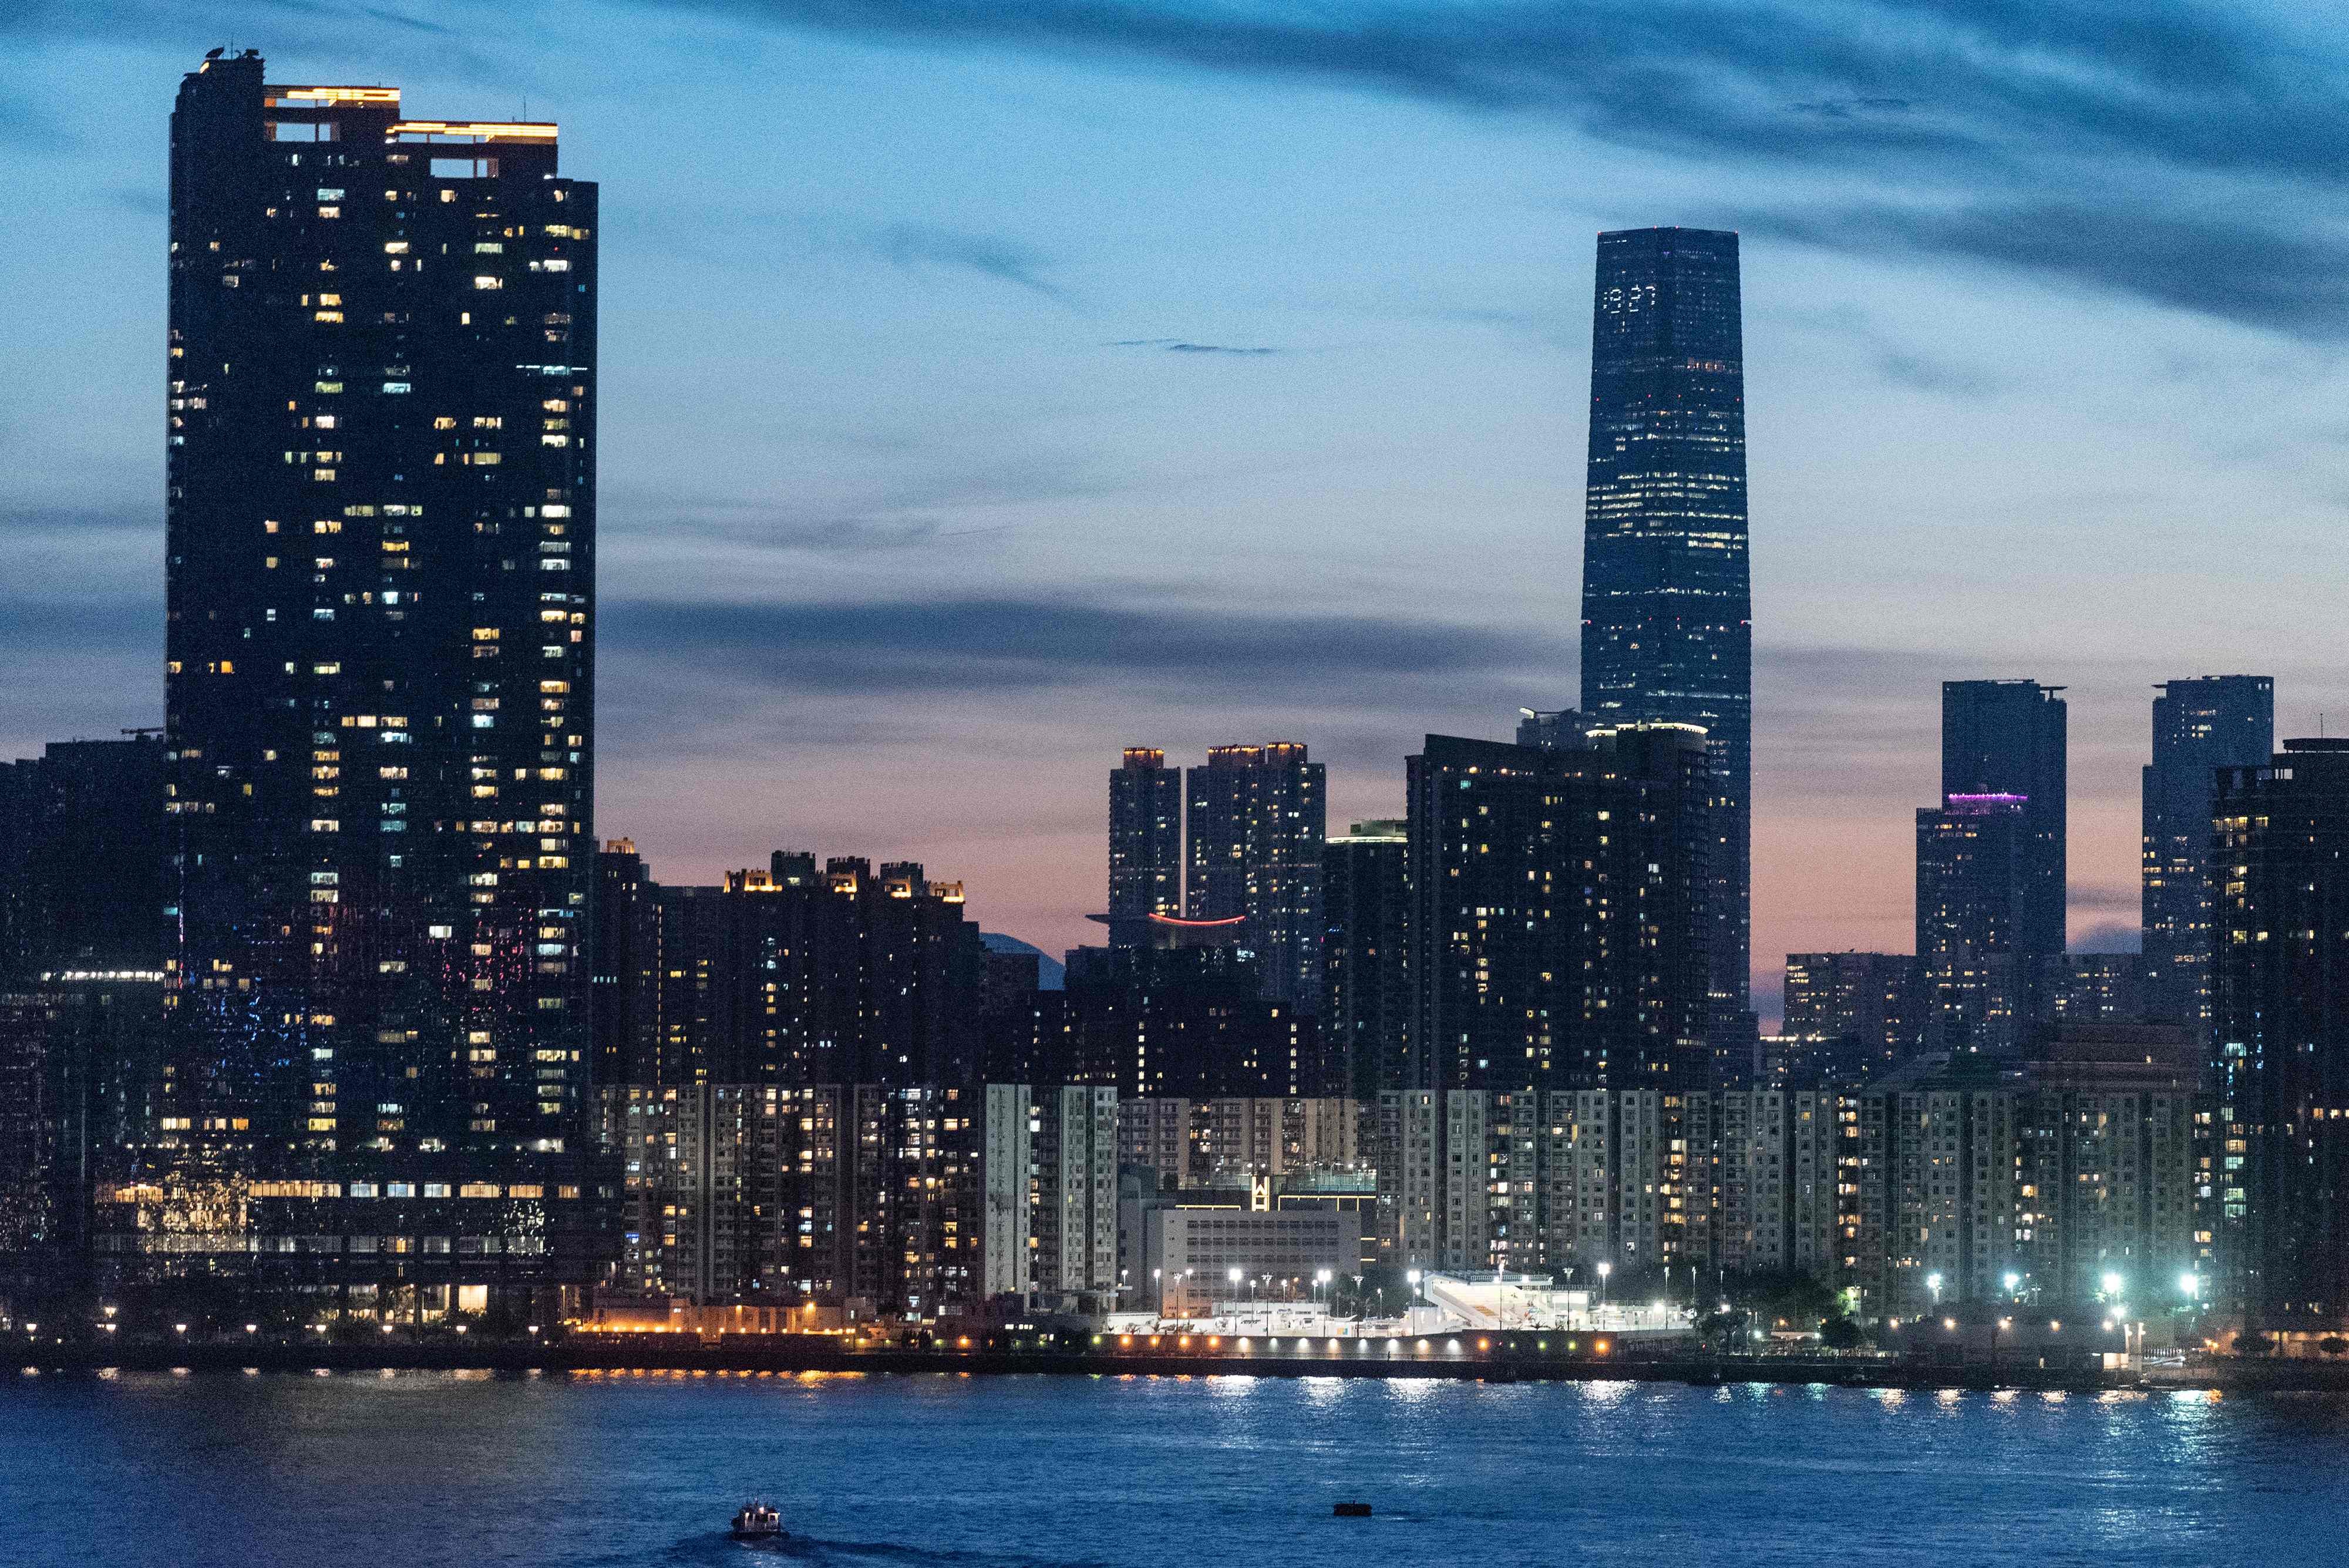 Deng Xiaoping understood the importance of China’s solemn commitments to Hong Kong when he asked Hong Kong investors to “put their hearts at ease”. Unfortunately, the past two years have seen an erosion of such a commitment. Photo: AFP